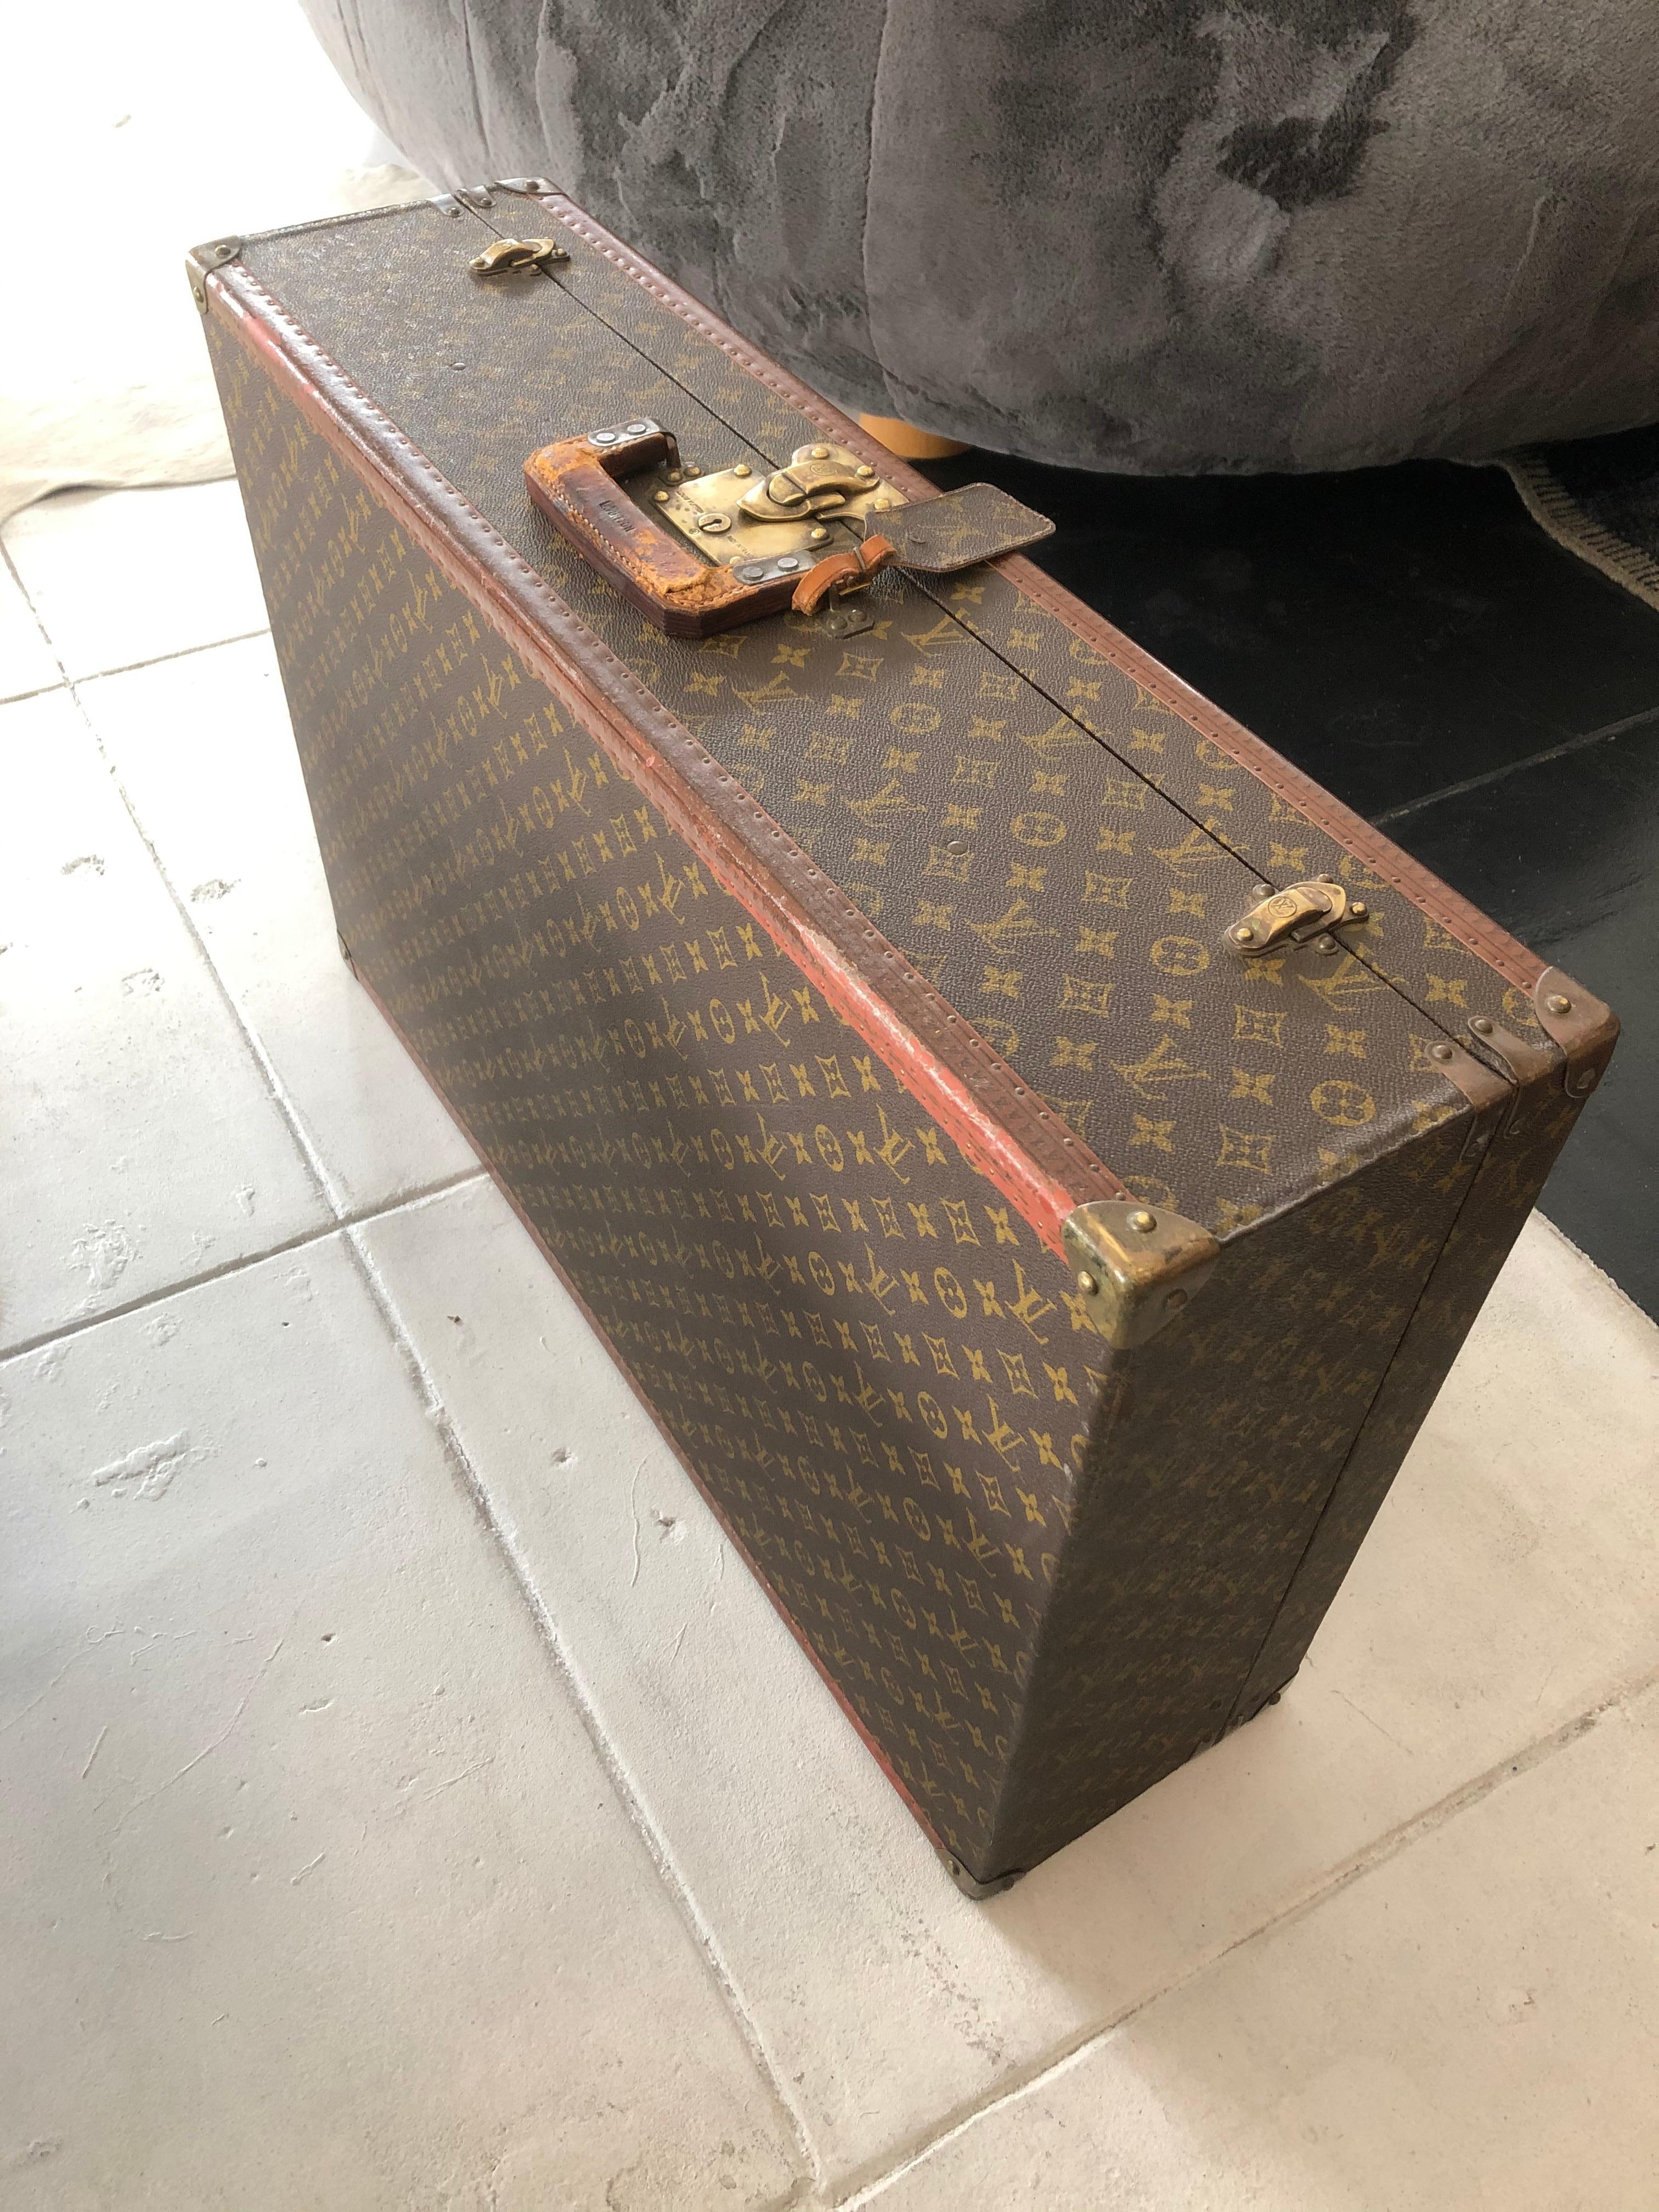 Louis Vuitton suitcase in LV monogram pattern with lozine trim, original brass corners and hardware. Perfect condition with original leather lining, and internal straps, 1948.
Dimensions:
8.5